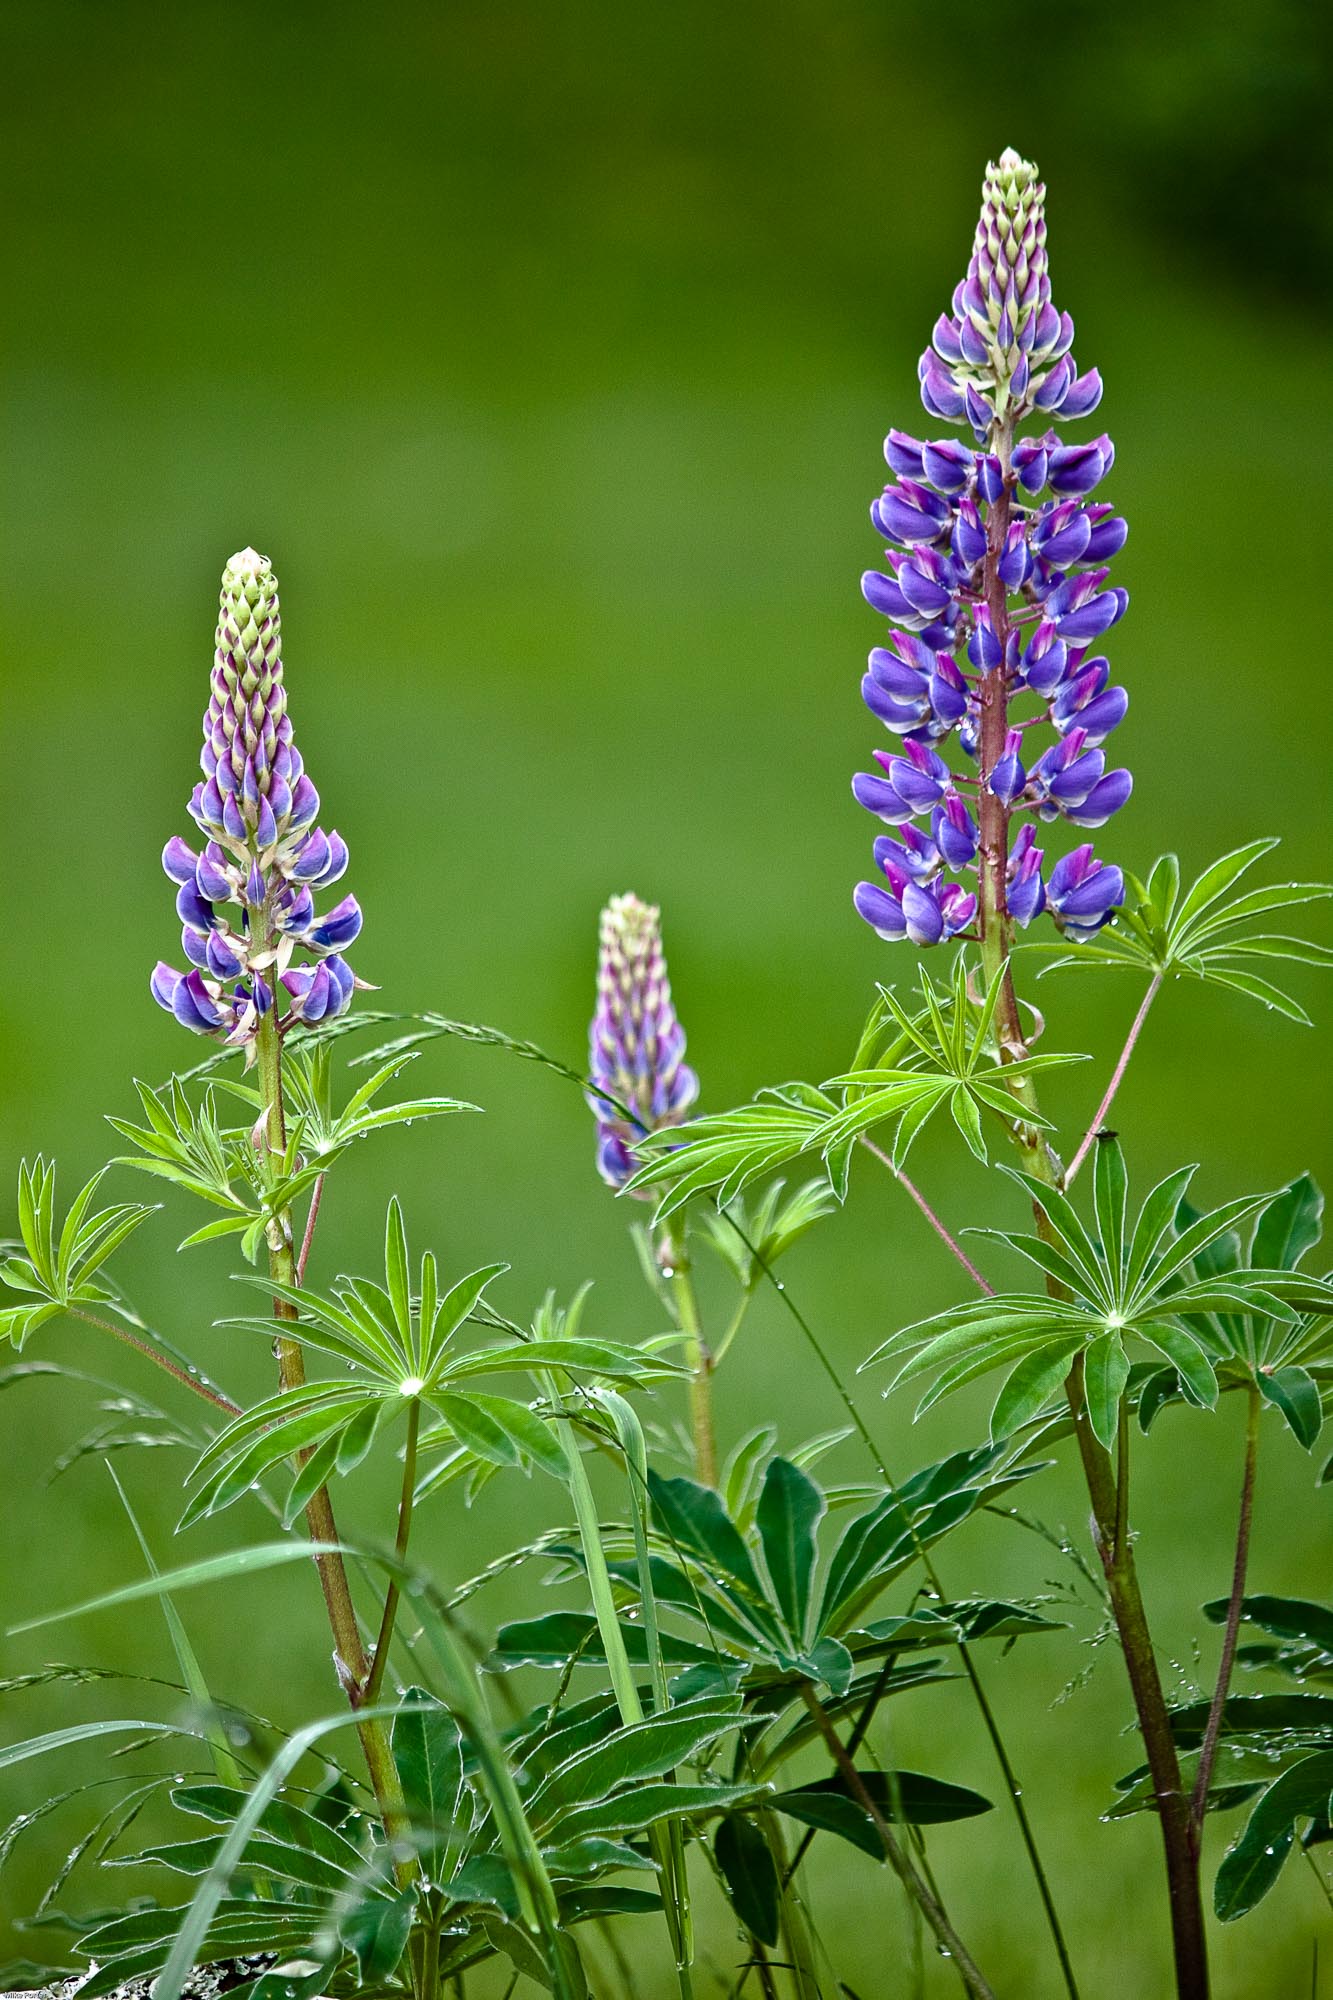 "Lupines"